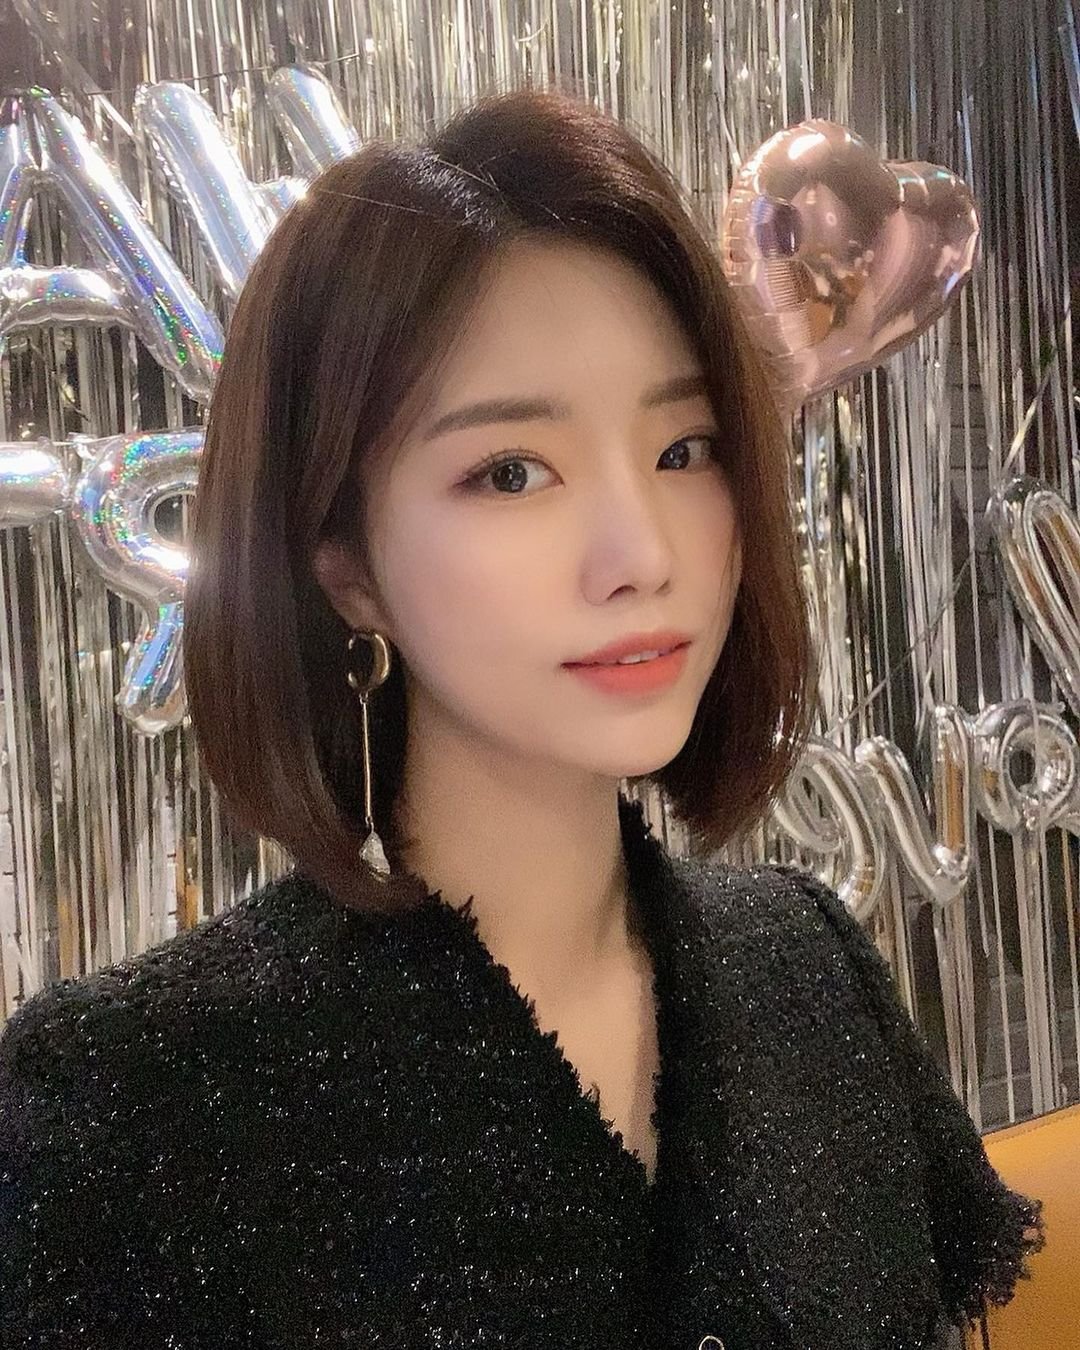 My name is Anna and I am 32 years old. Nice to meet you. I am from Taiwan and now I am in Seoul. I am a fashion designer    https://t.co/XI9AIGXMAZ